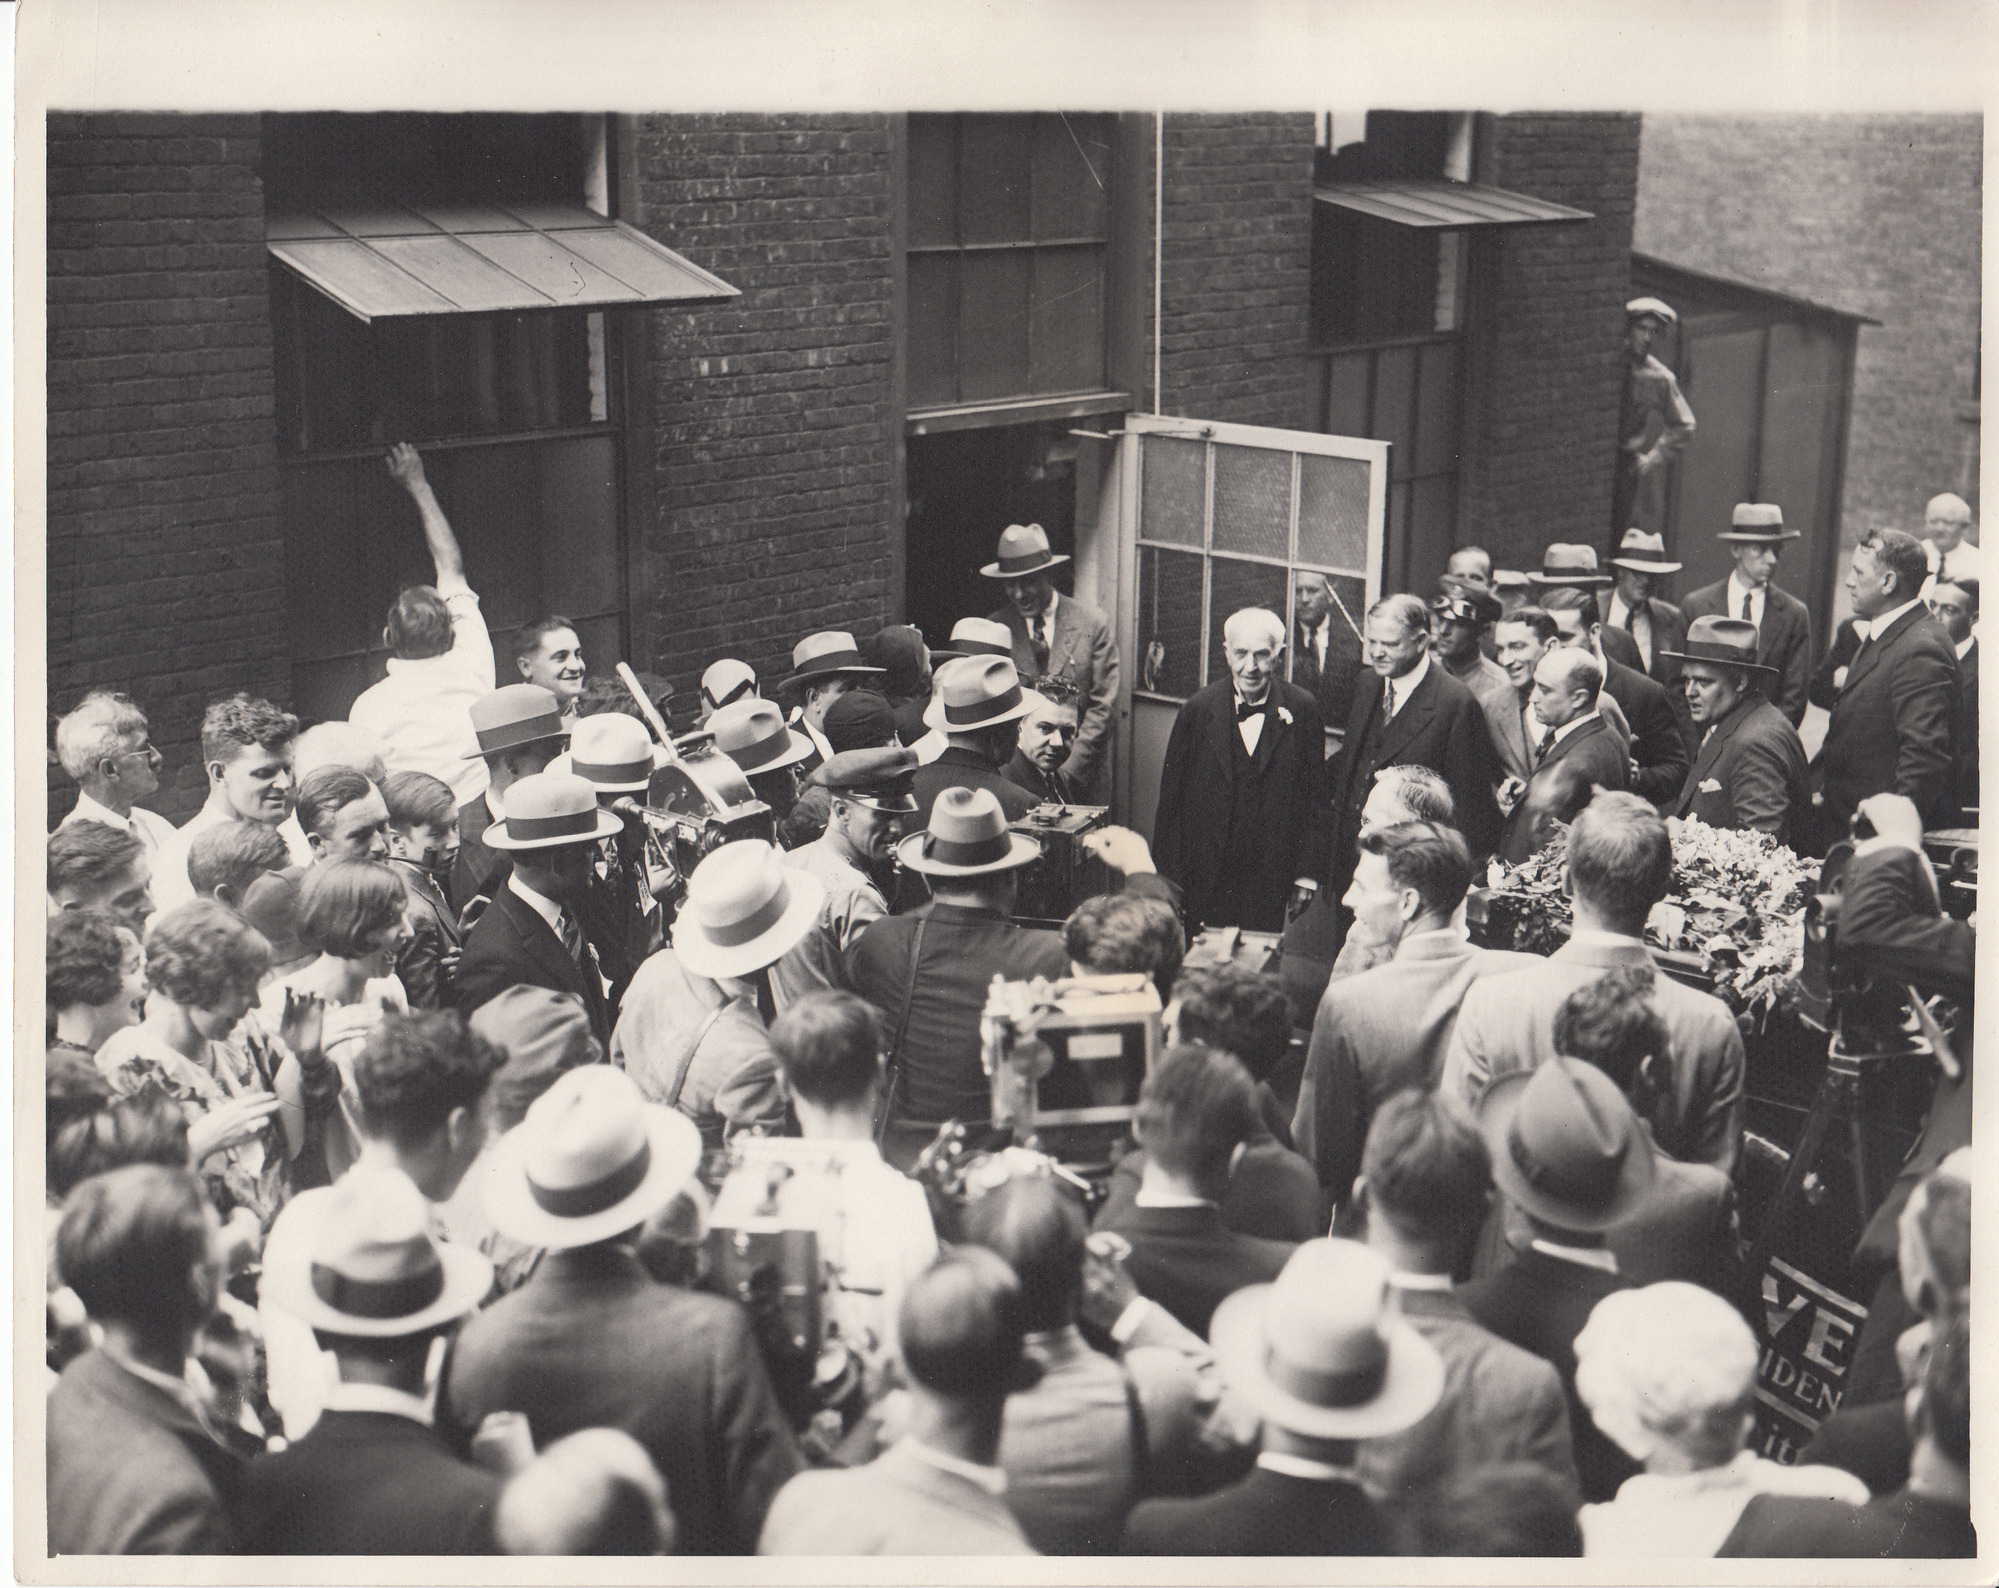 Herbert Hoover and Thomas Edison surrounded by photographers and reporters at the West Orange Laboratory exiting the Chemistry Lab on "Hoover Day."